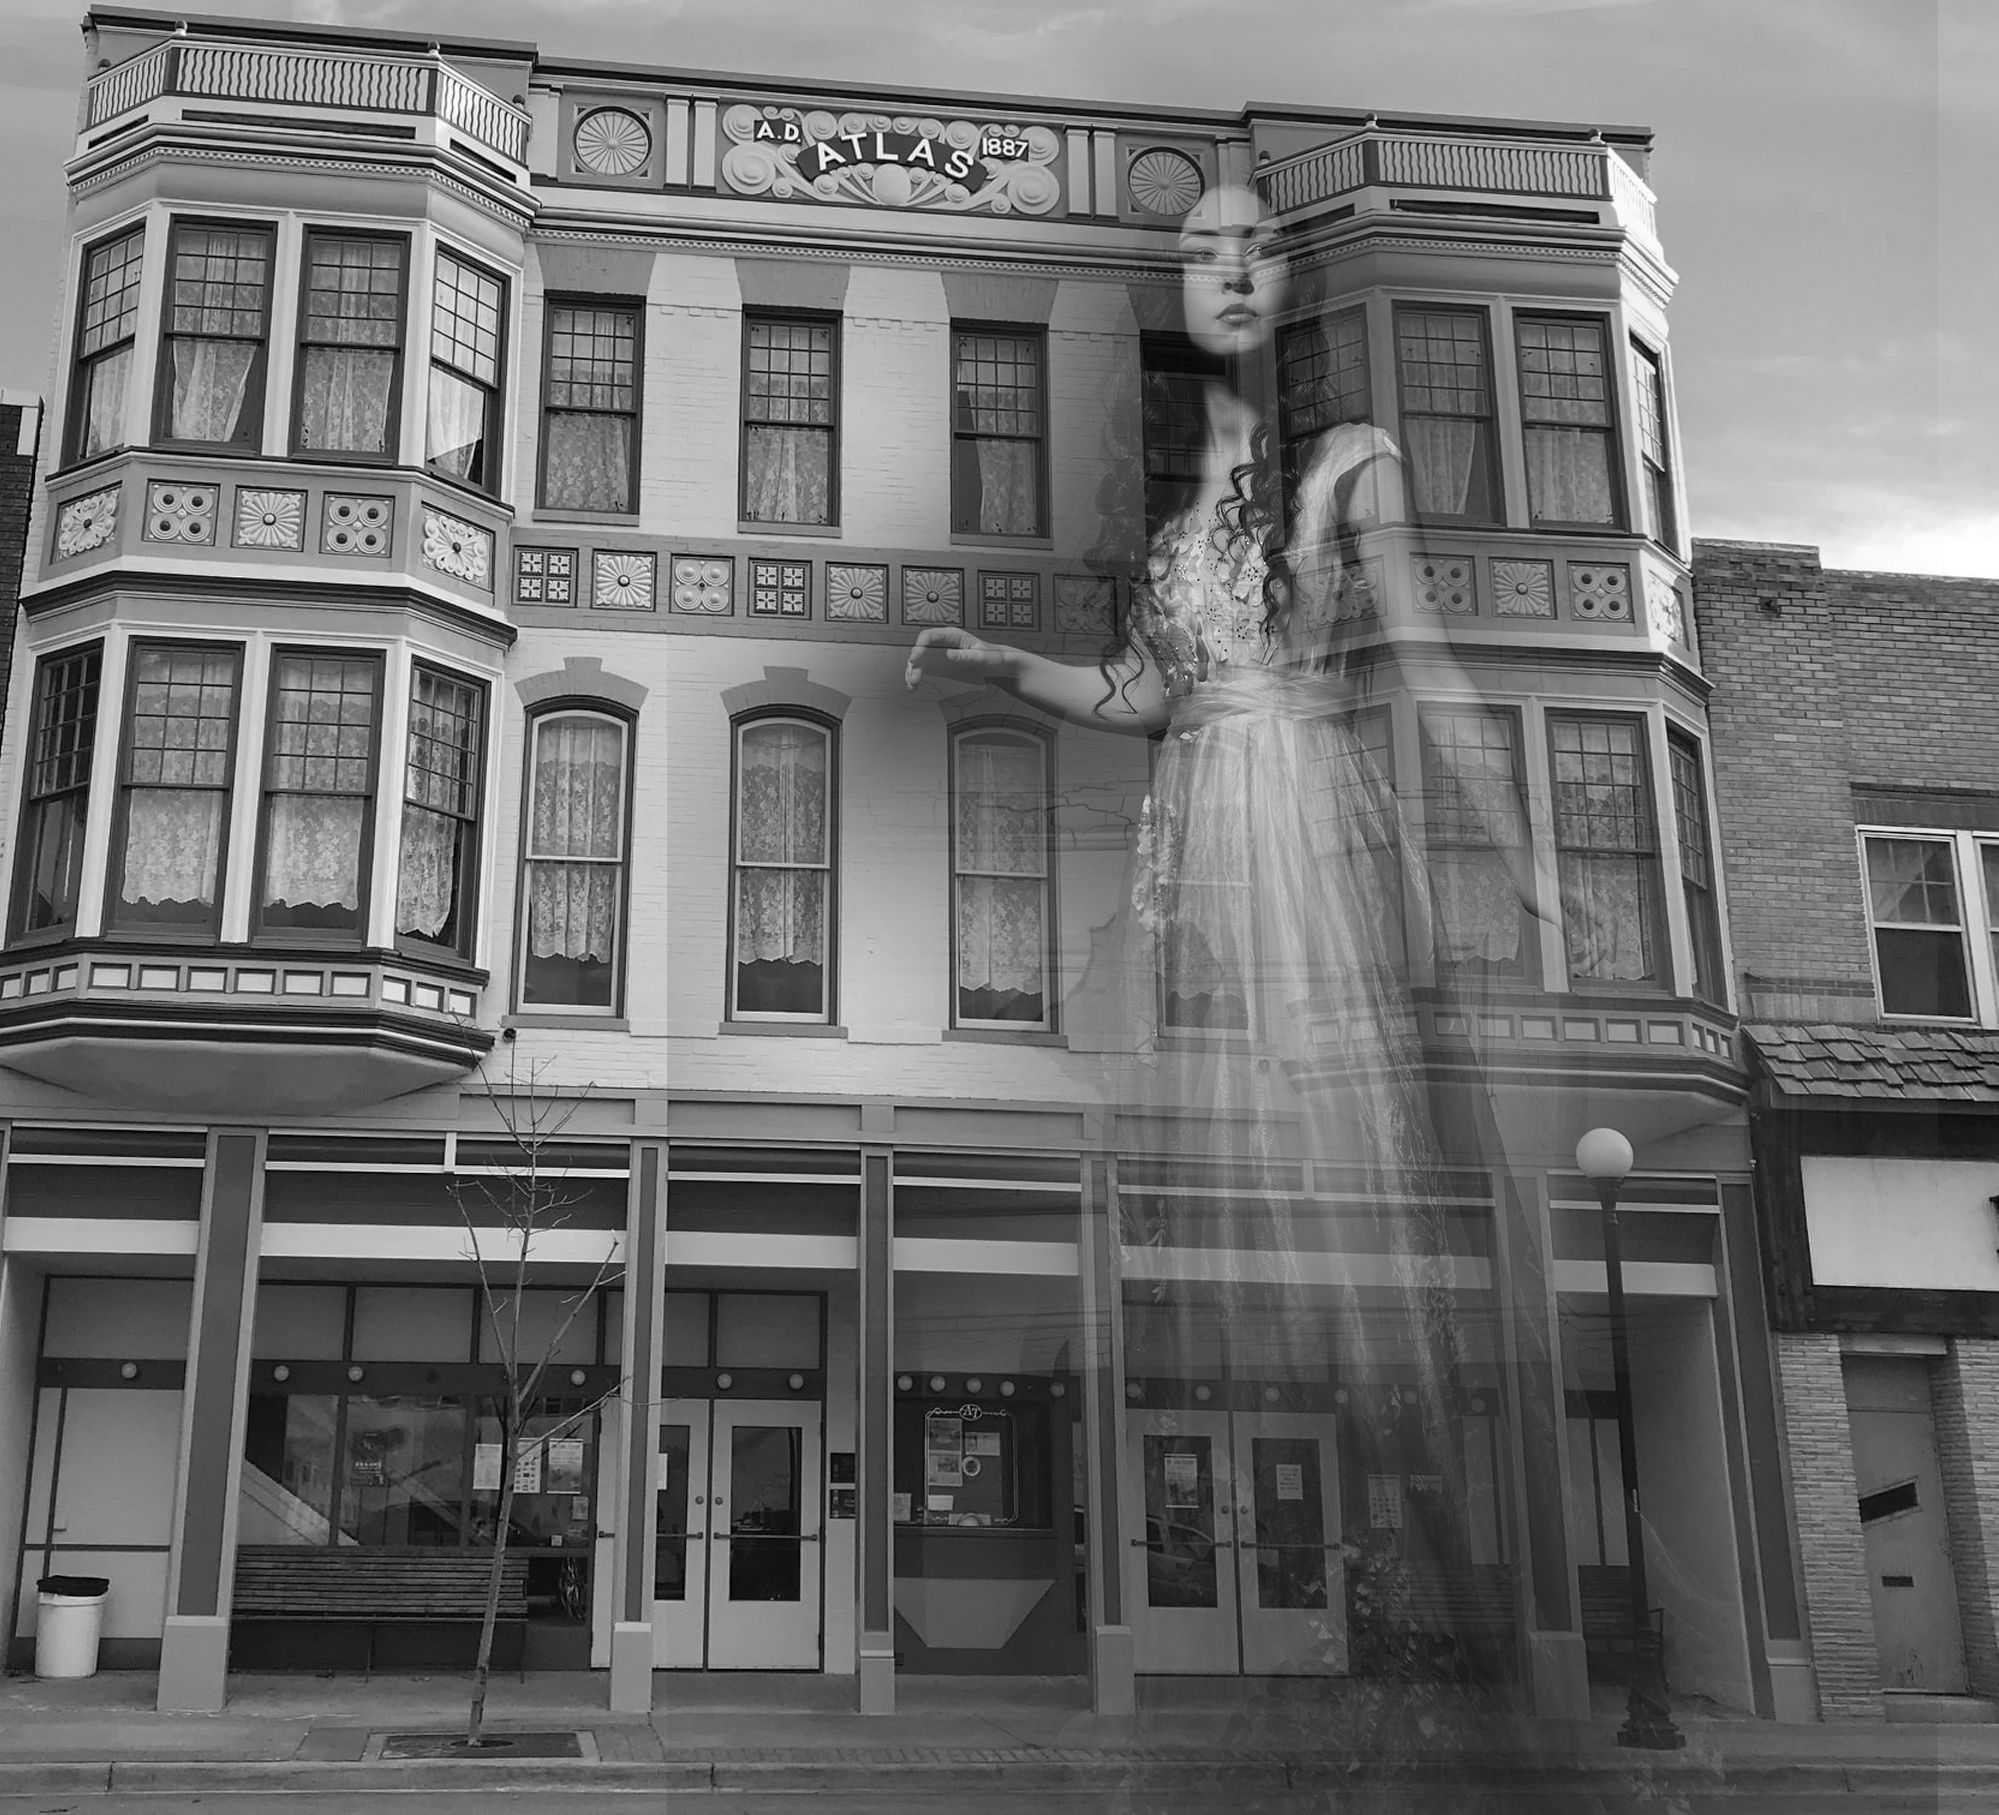 Take A Ghost Tour Of The Haunted Atlas Theater